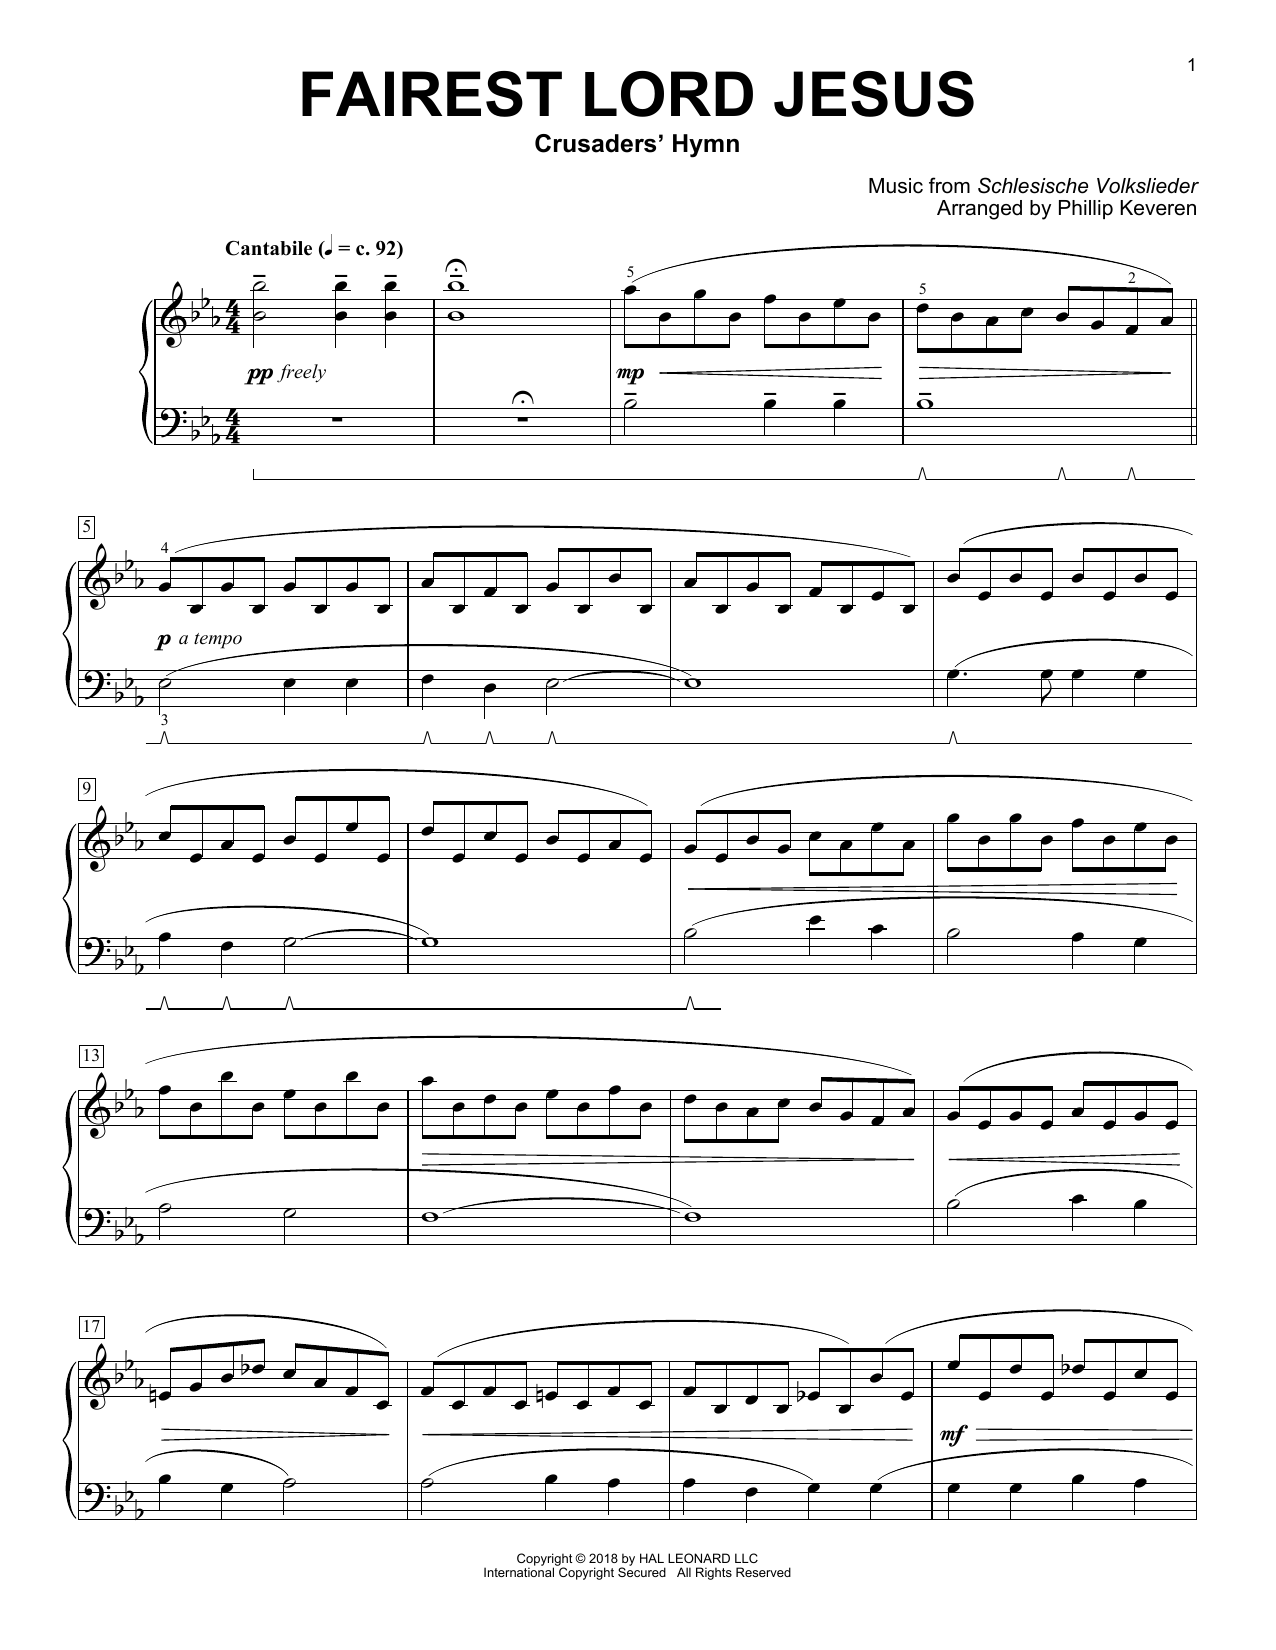 Download Traditional Hymn Fairest Lord Jesus [Classical version] Sheet Music